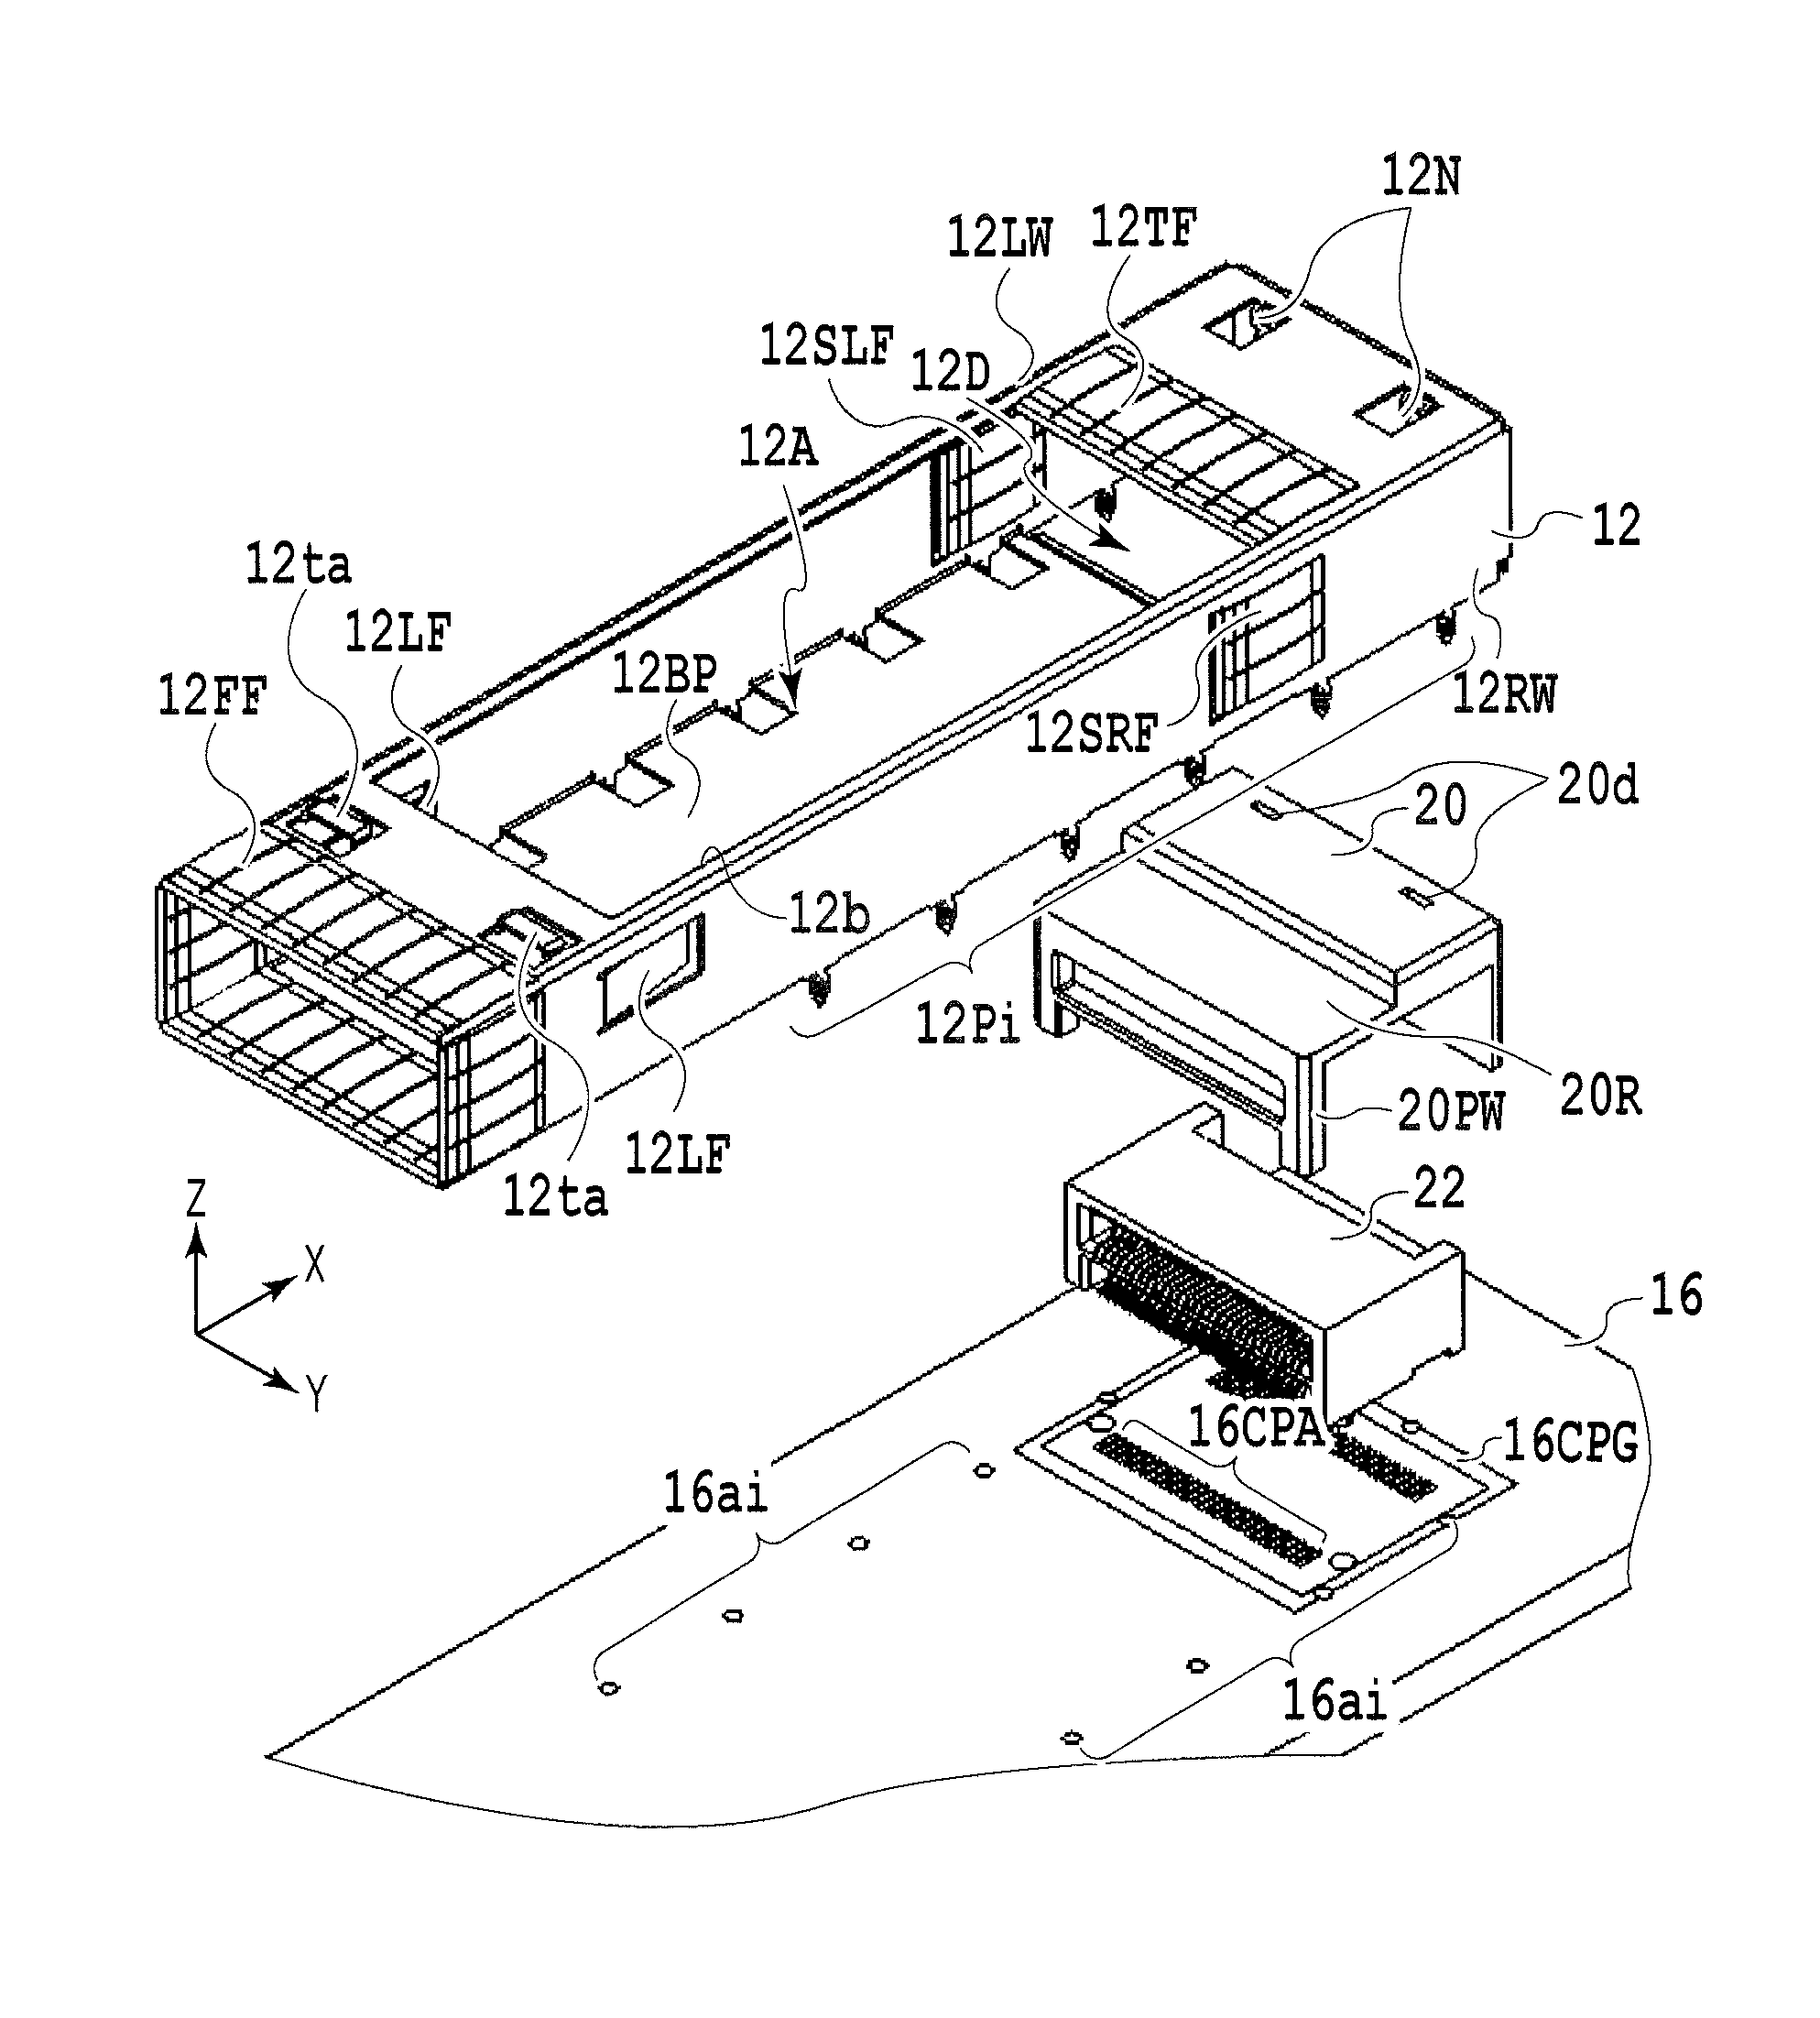 Receptacle cage, receptacle assembly, and transceiver module assembly